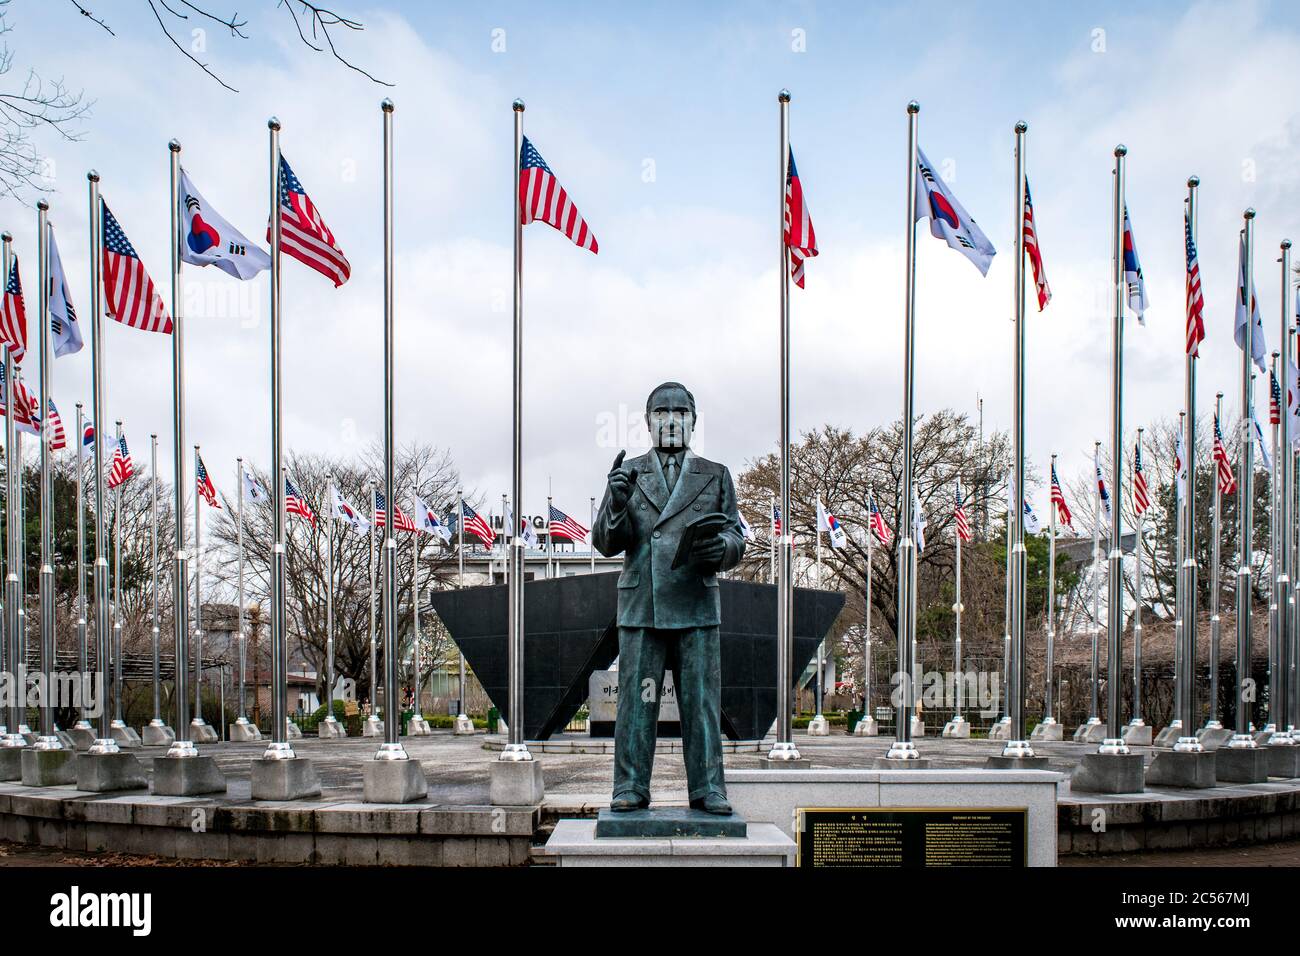 Statue of United States President Harry Truman at the Demilitarized Zone (DMZ) near the borders of South Korea and North Korea. Stock Photo